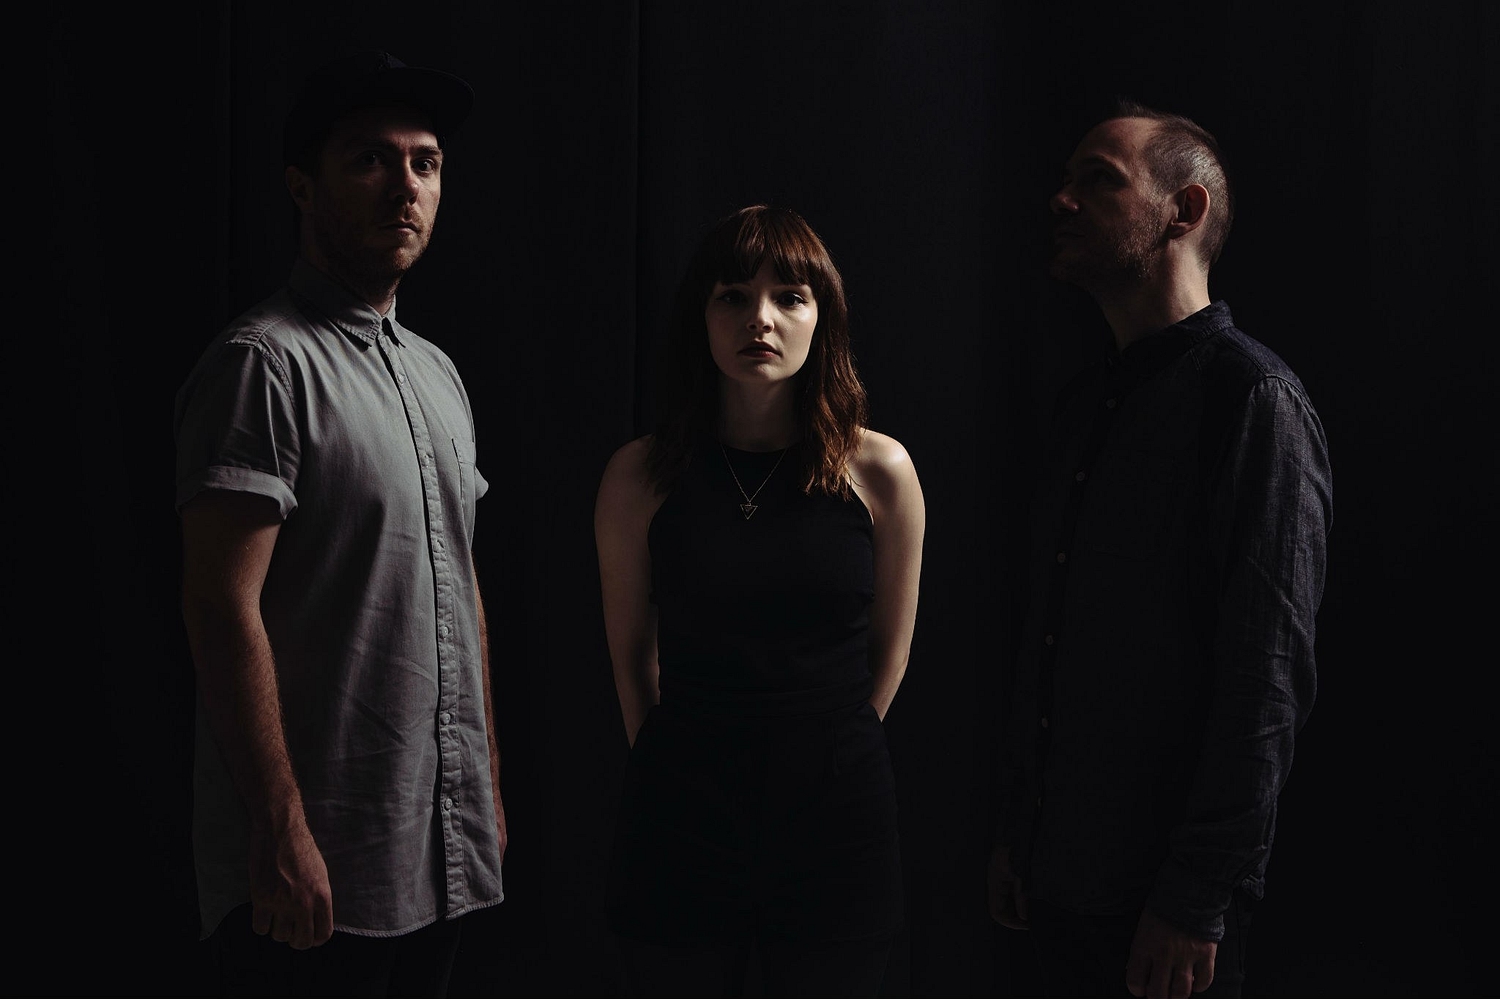 Chvrches: The eye of the storm